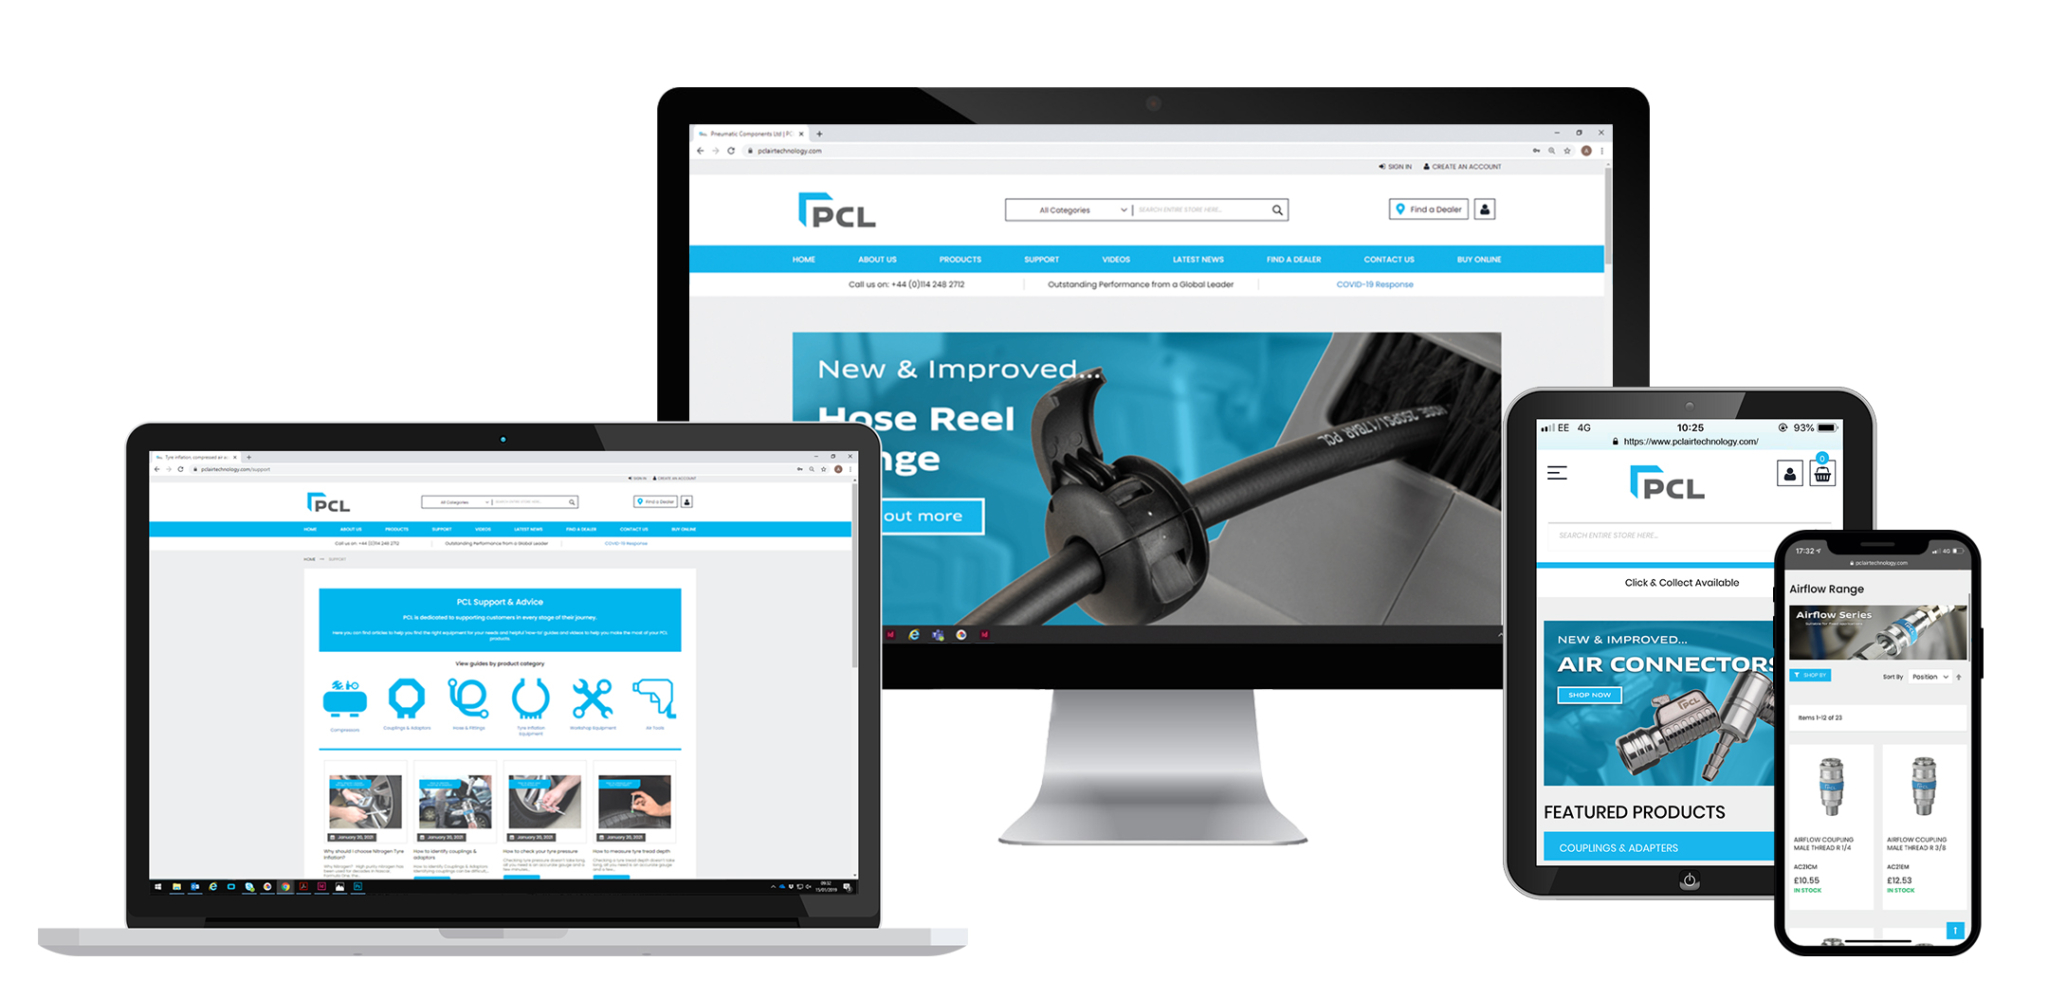 PCL merges main website with online product